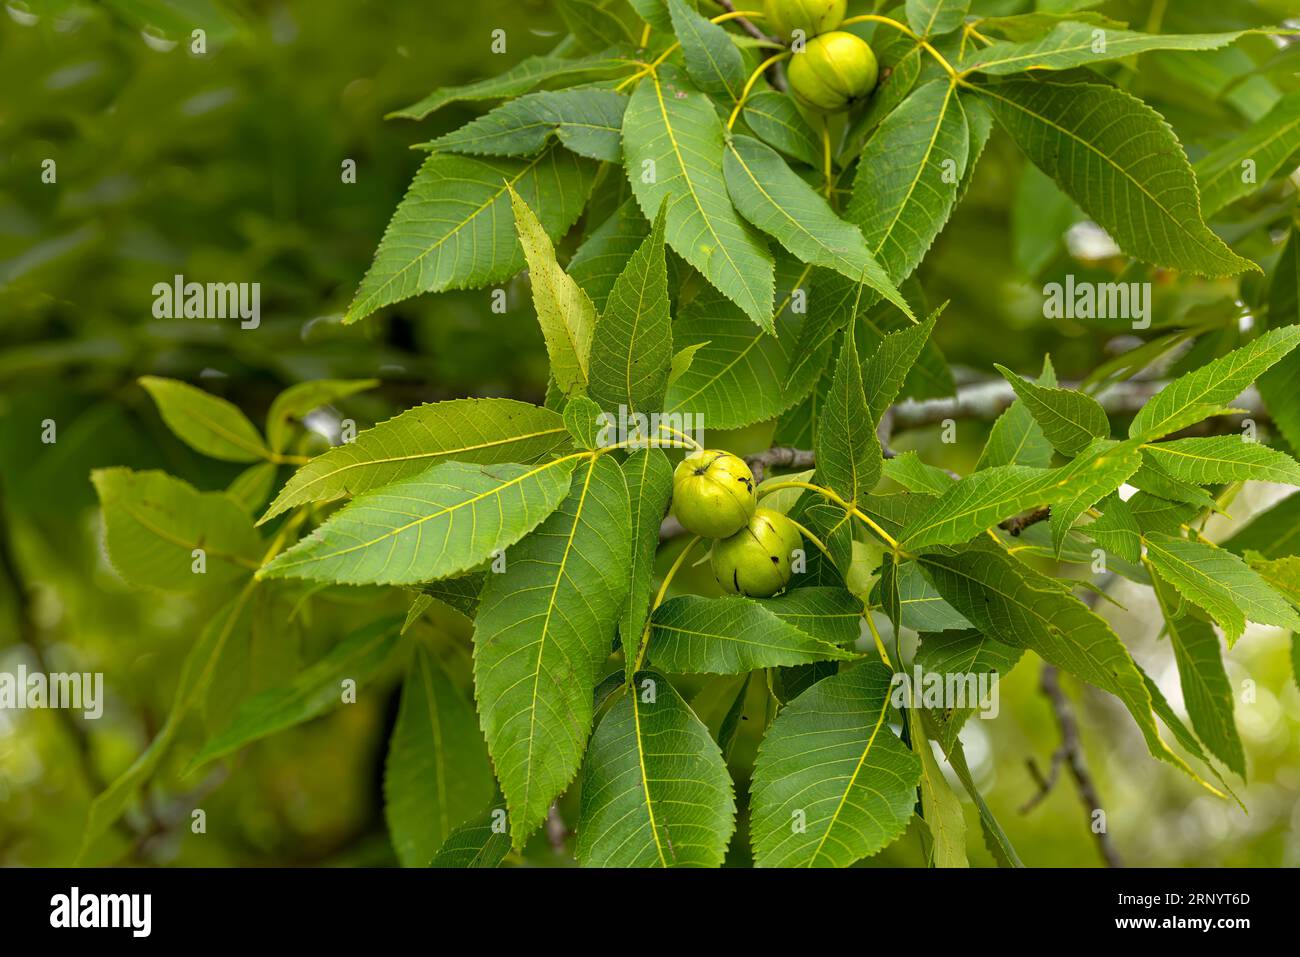 The White walnut (Juglans cinerea), commonly known as butternut, is a species of walnut native to the eastern United States and southeast Canada. Stock Photo